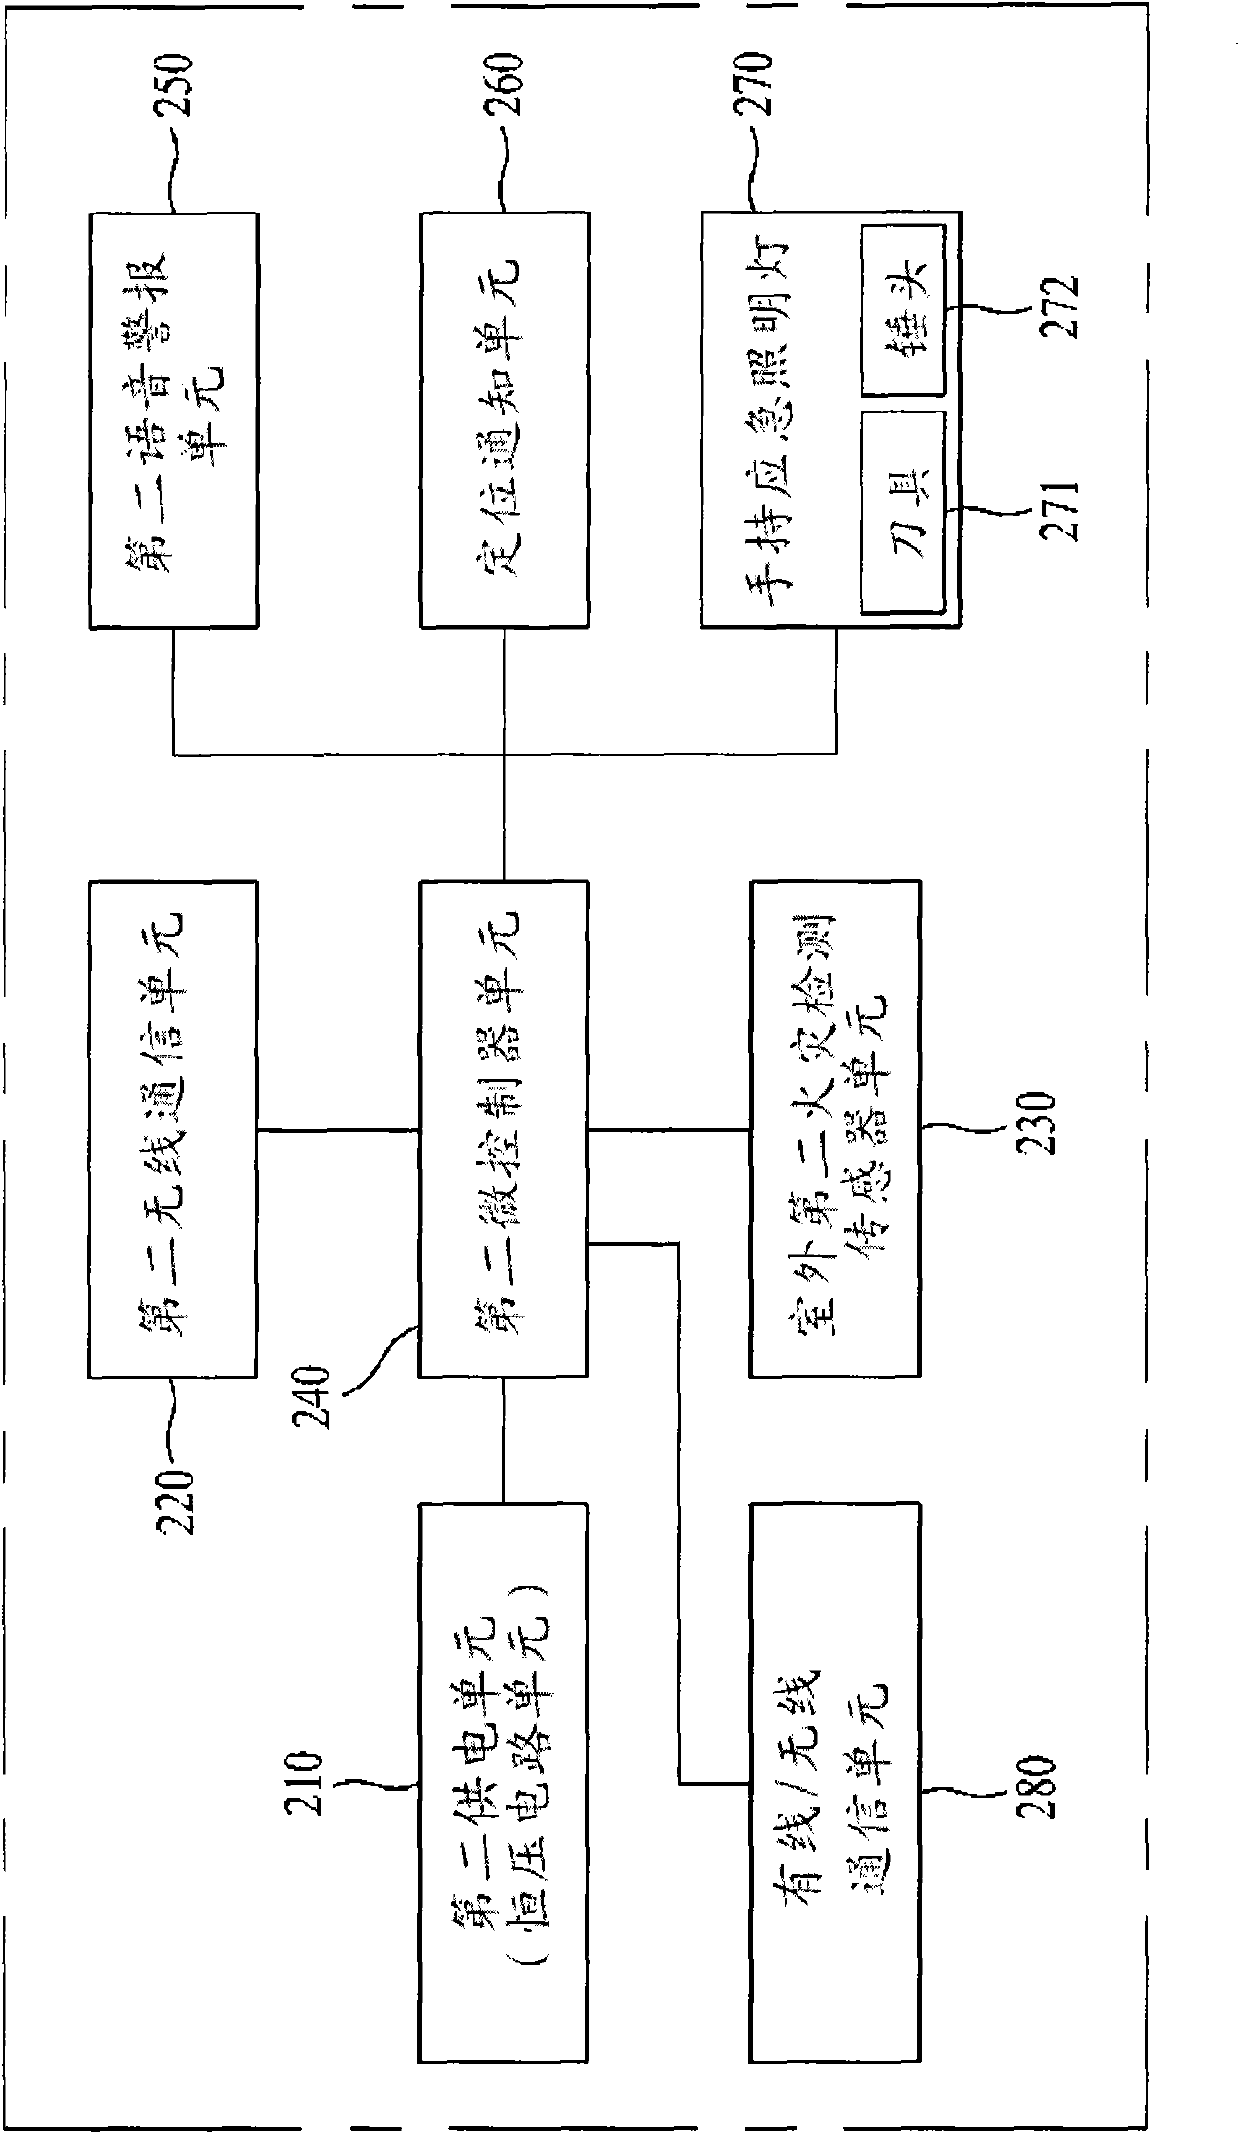 Fire sensing system with wireless communications and position tracking functions